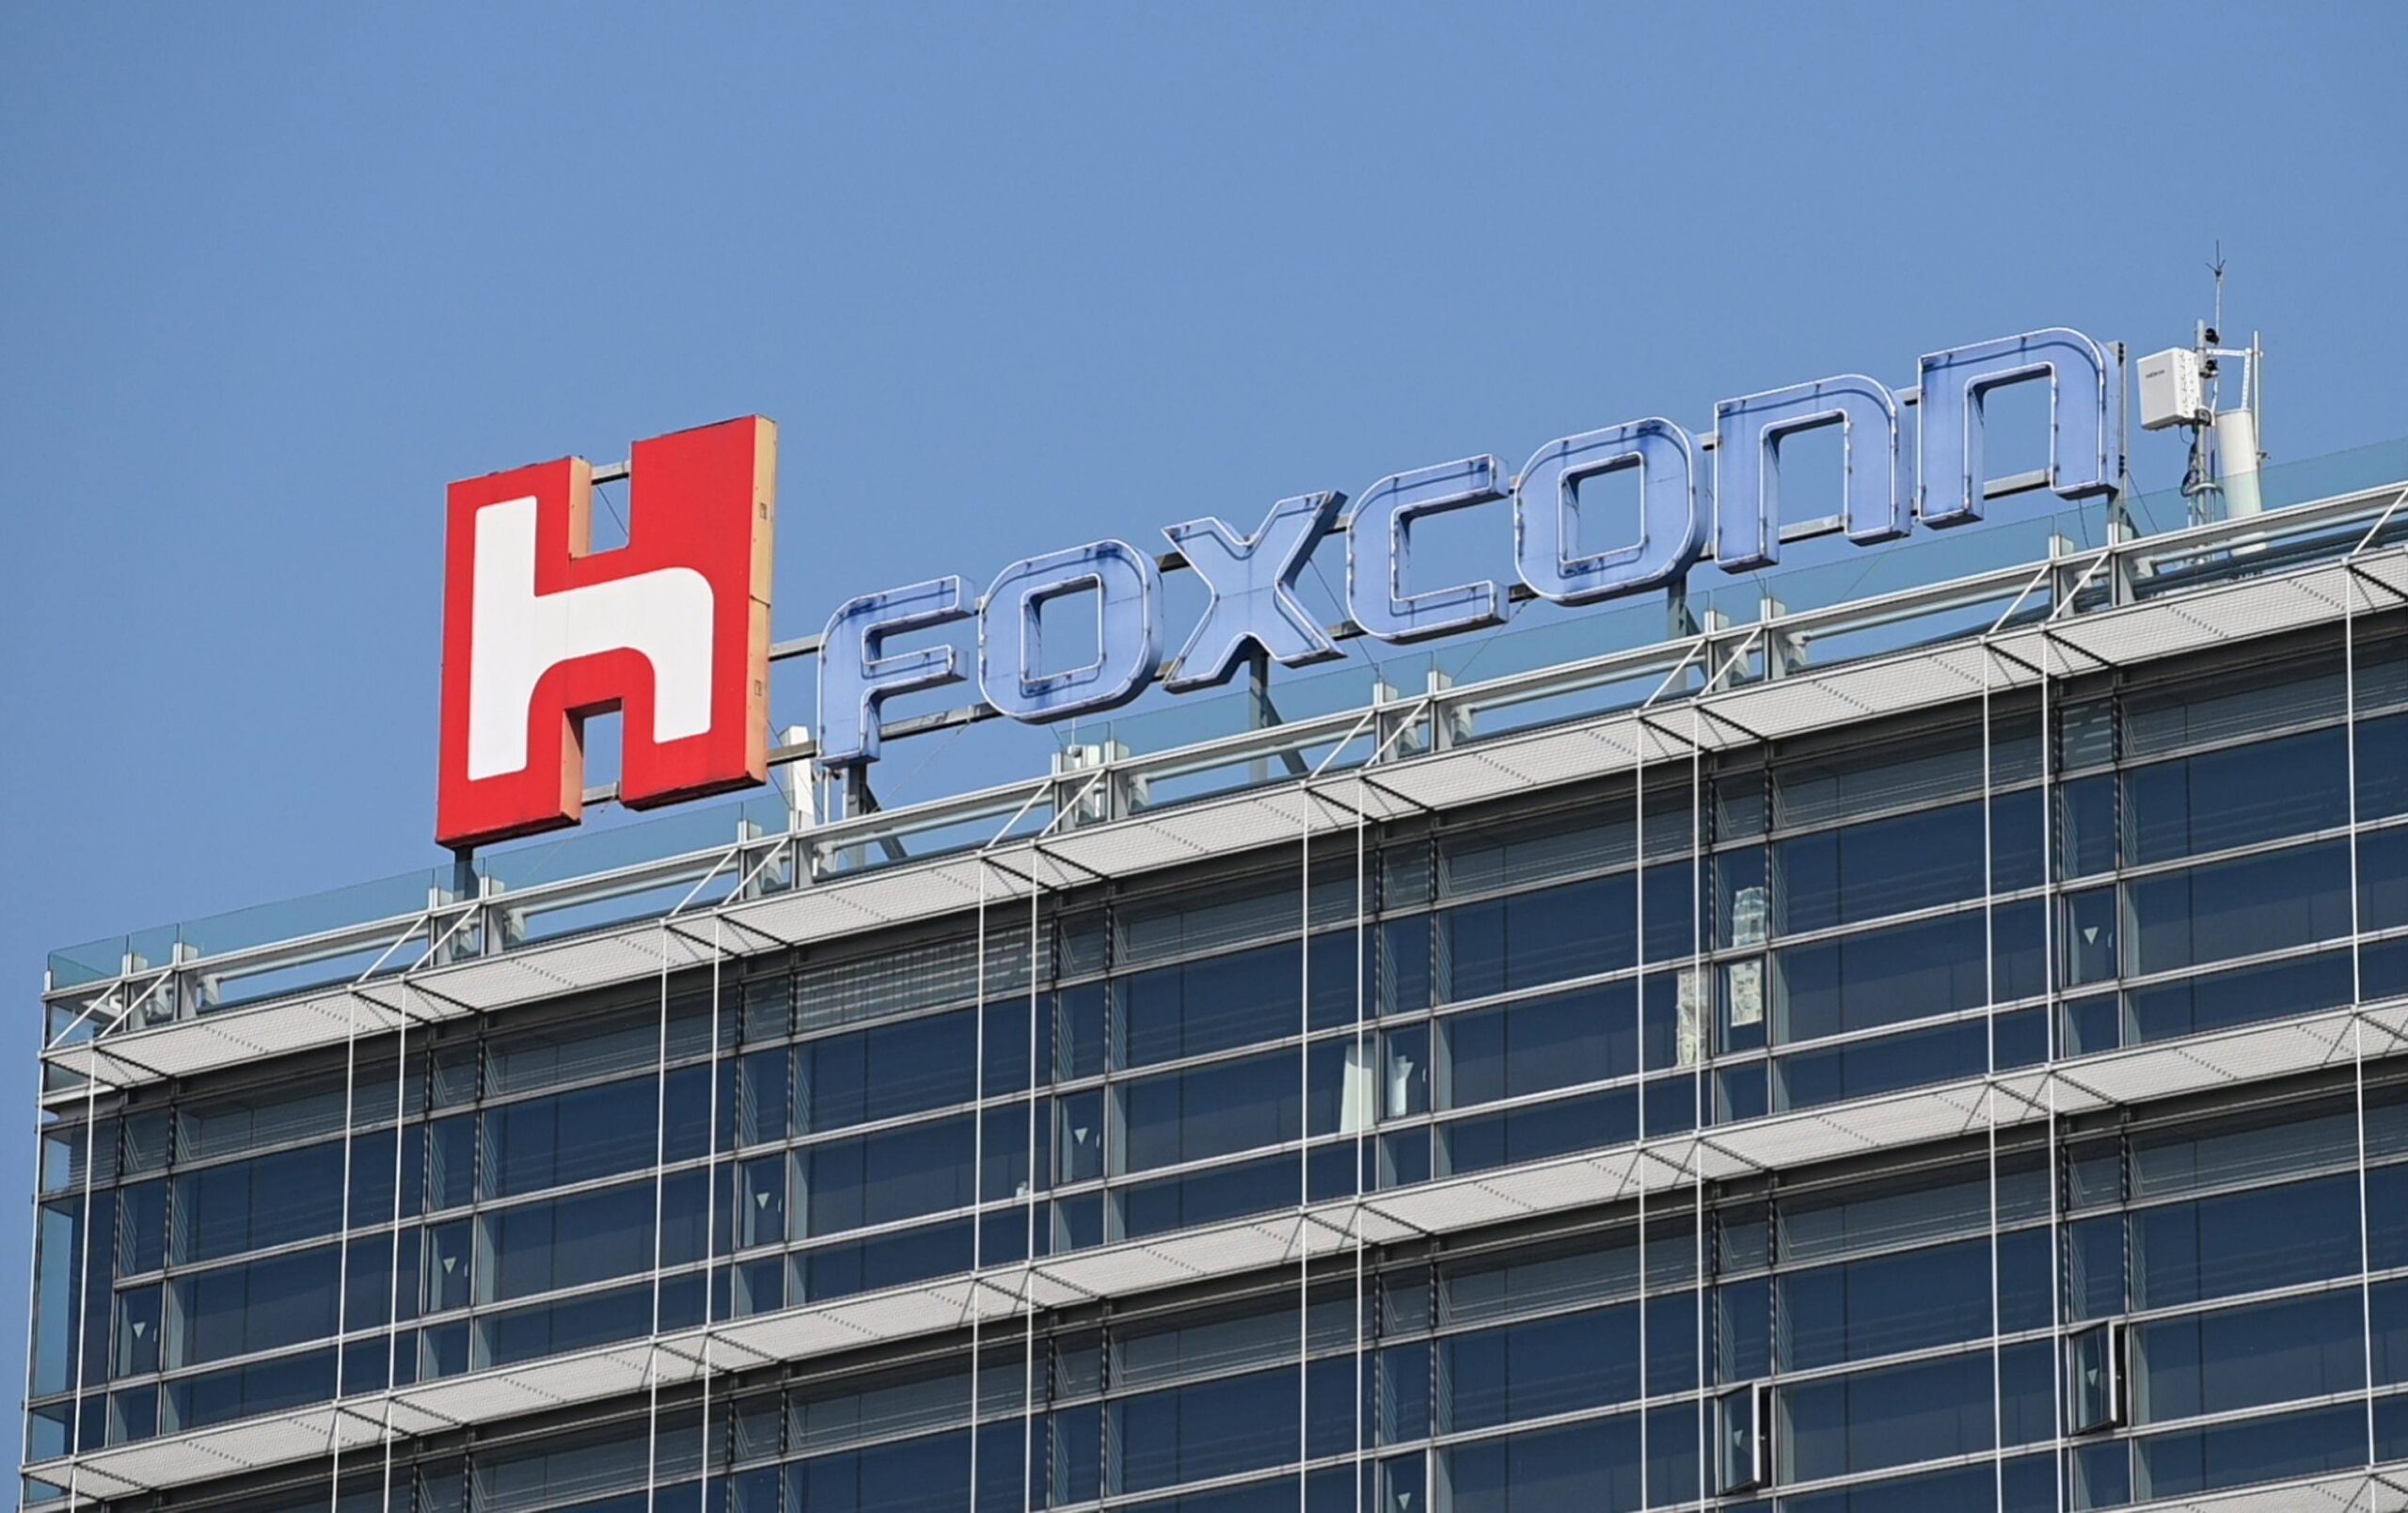 Foxconn announced on Tuesday that it has increased bonuses for employees at its Zhengzhou facility in central China as it seeks to quiet employee unrest at the major iPhone manufacturing location over COVID restrictions.